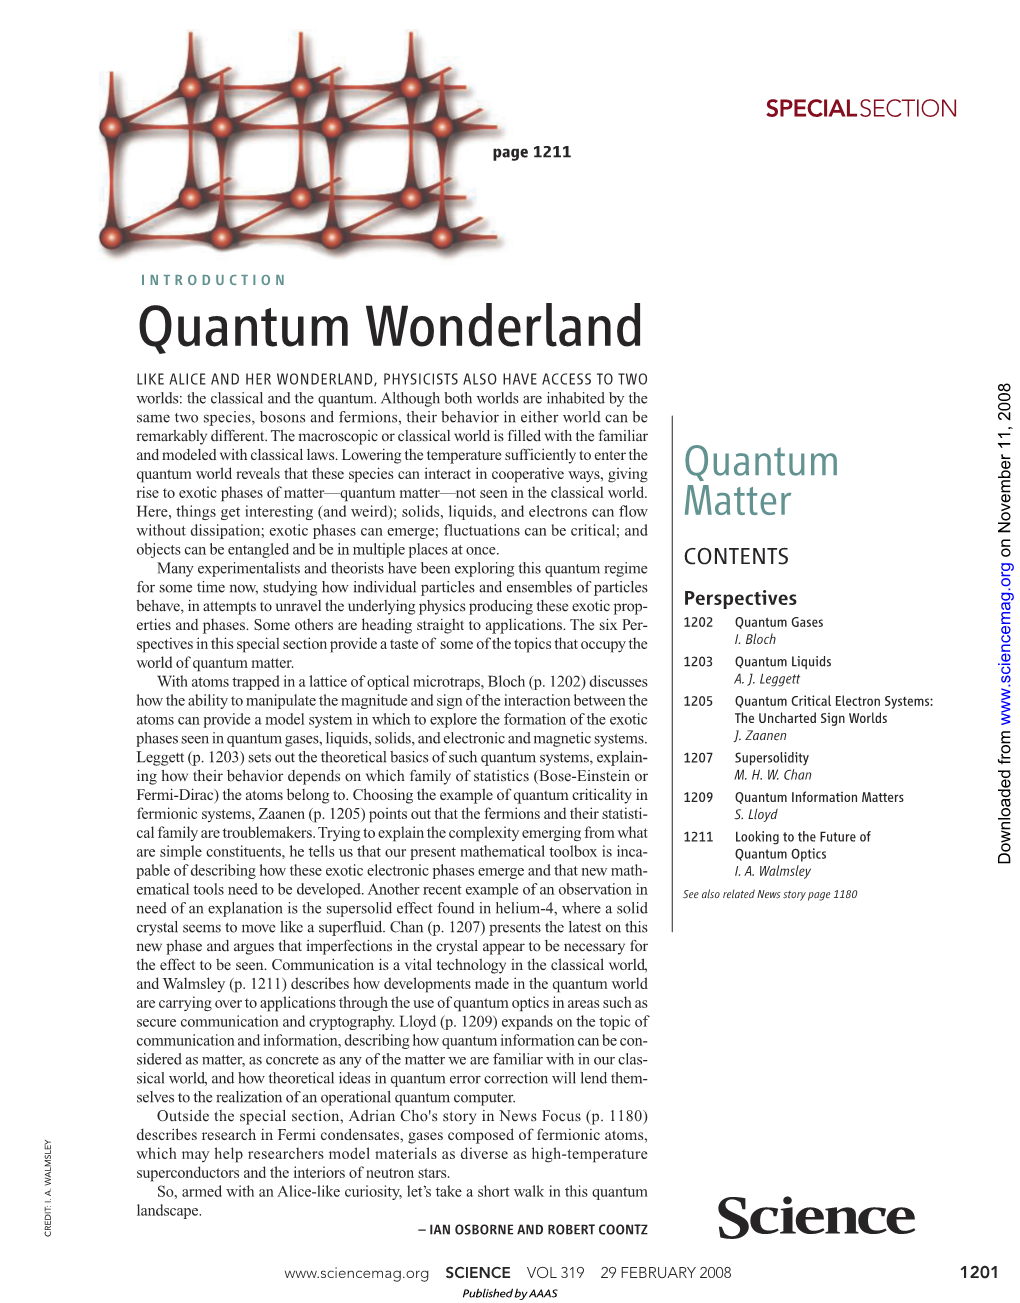 Quantum Wonderland LIKE ALICE and HER WONDERLAND, PHYSICISTS ALSO HAVE ACCESS to TWO Worlds: the Classical and the Quantum